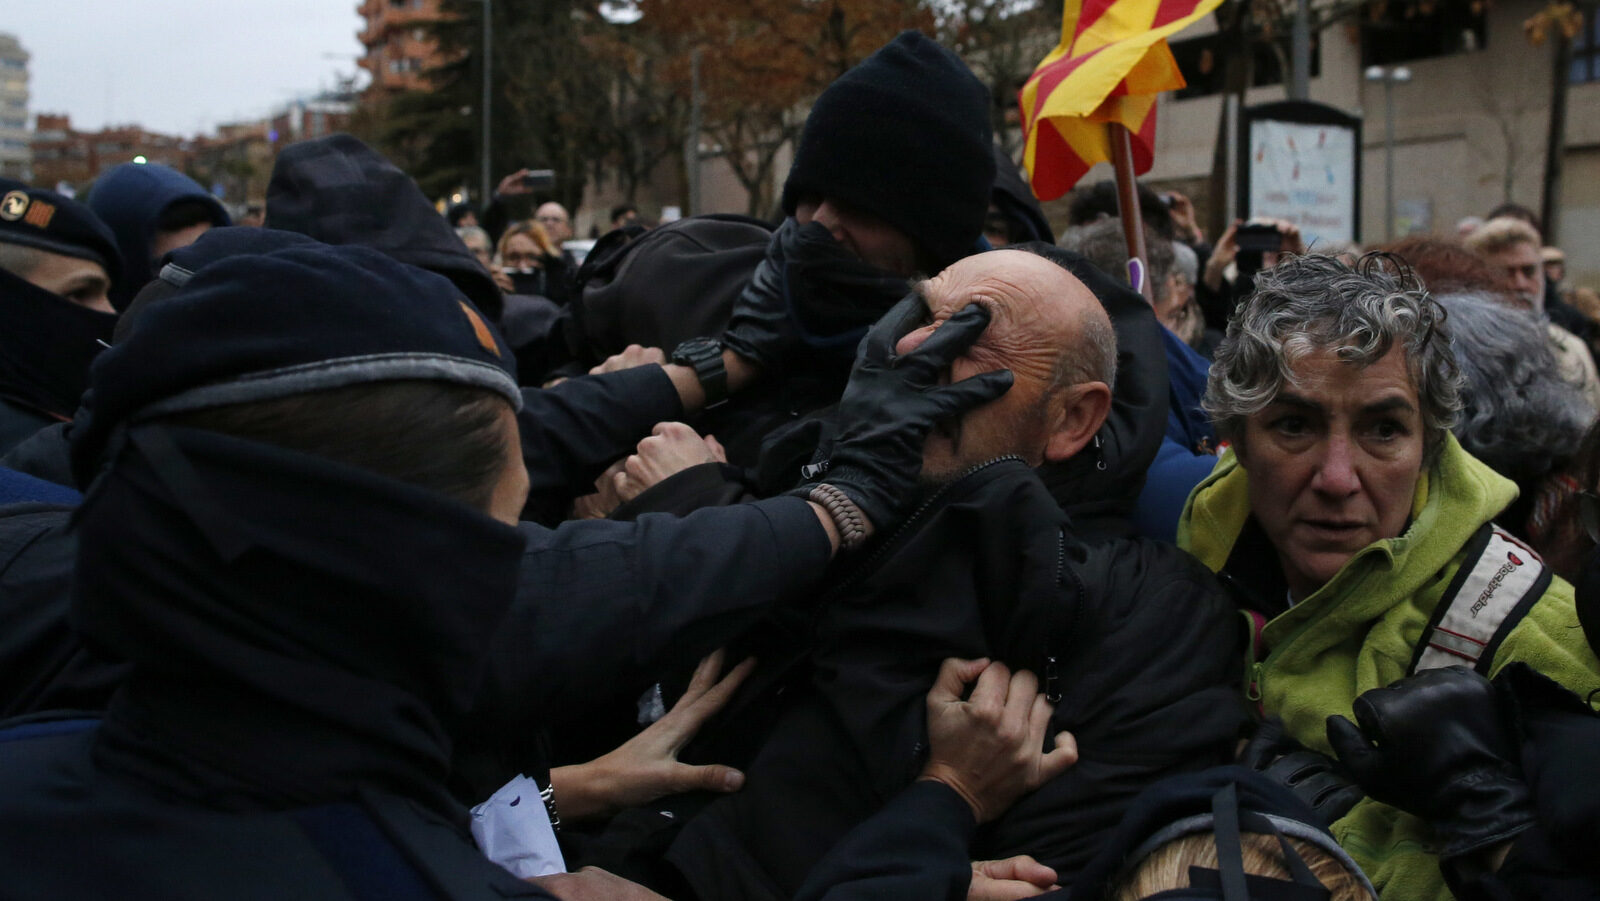 Catalan Mossos d'Esquadra officers scuffle with demonstrators around Lleida museum in the west of Catalonia, Spain, Dec. 11, 2017. Police in Spain's northeastern Catalan city of Lleida have clashed with people protesting a judicial ruling ordering the city's museum to return 44 pieces of religious art to the neighboring regional government of Aragon.(AP/Manu Fernandez)